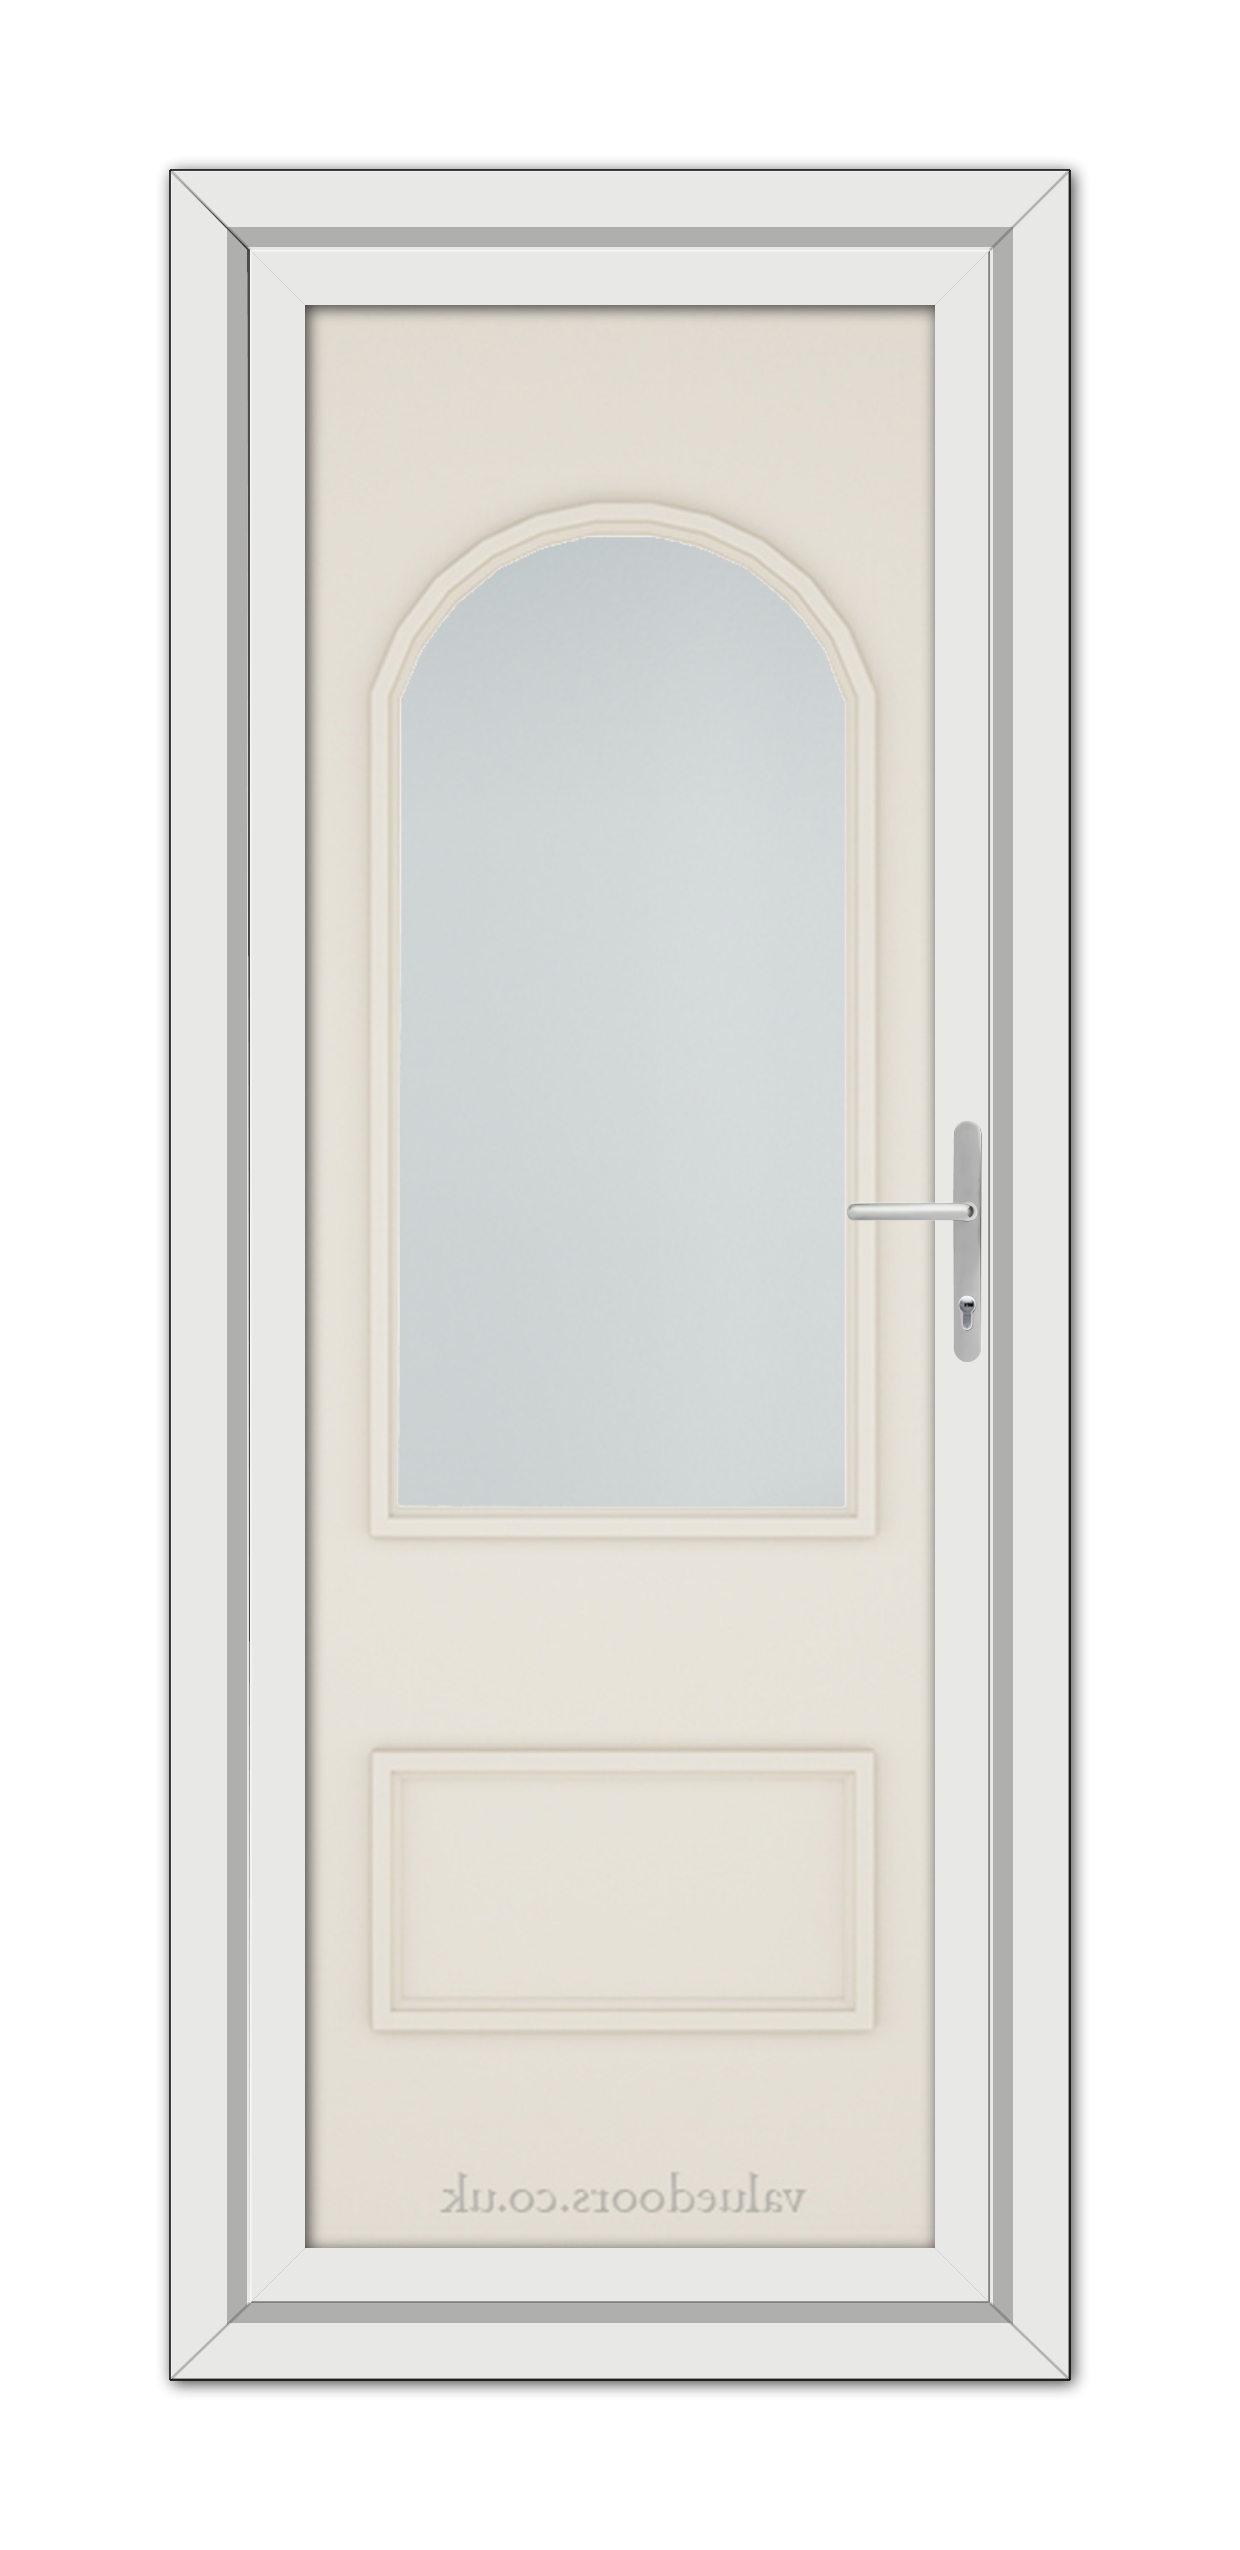 A modern Cream Rockingham uPVC door featuring a vertical oval glass panel at the top and a solid lower panel, with a metallic handle on the right side.